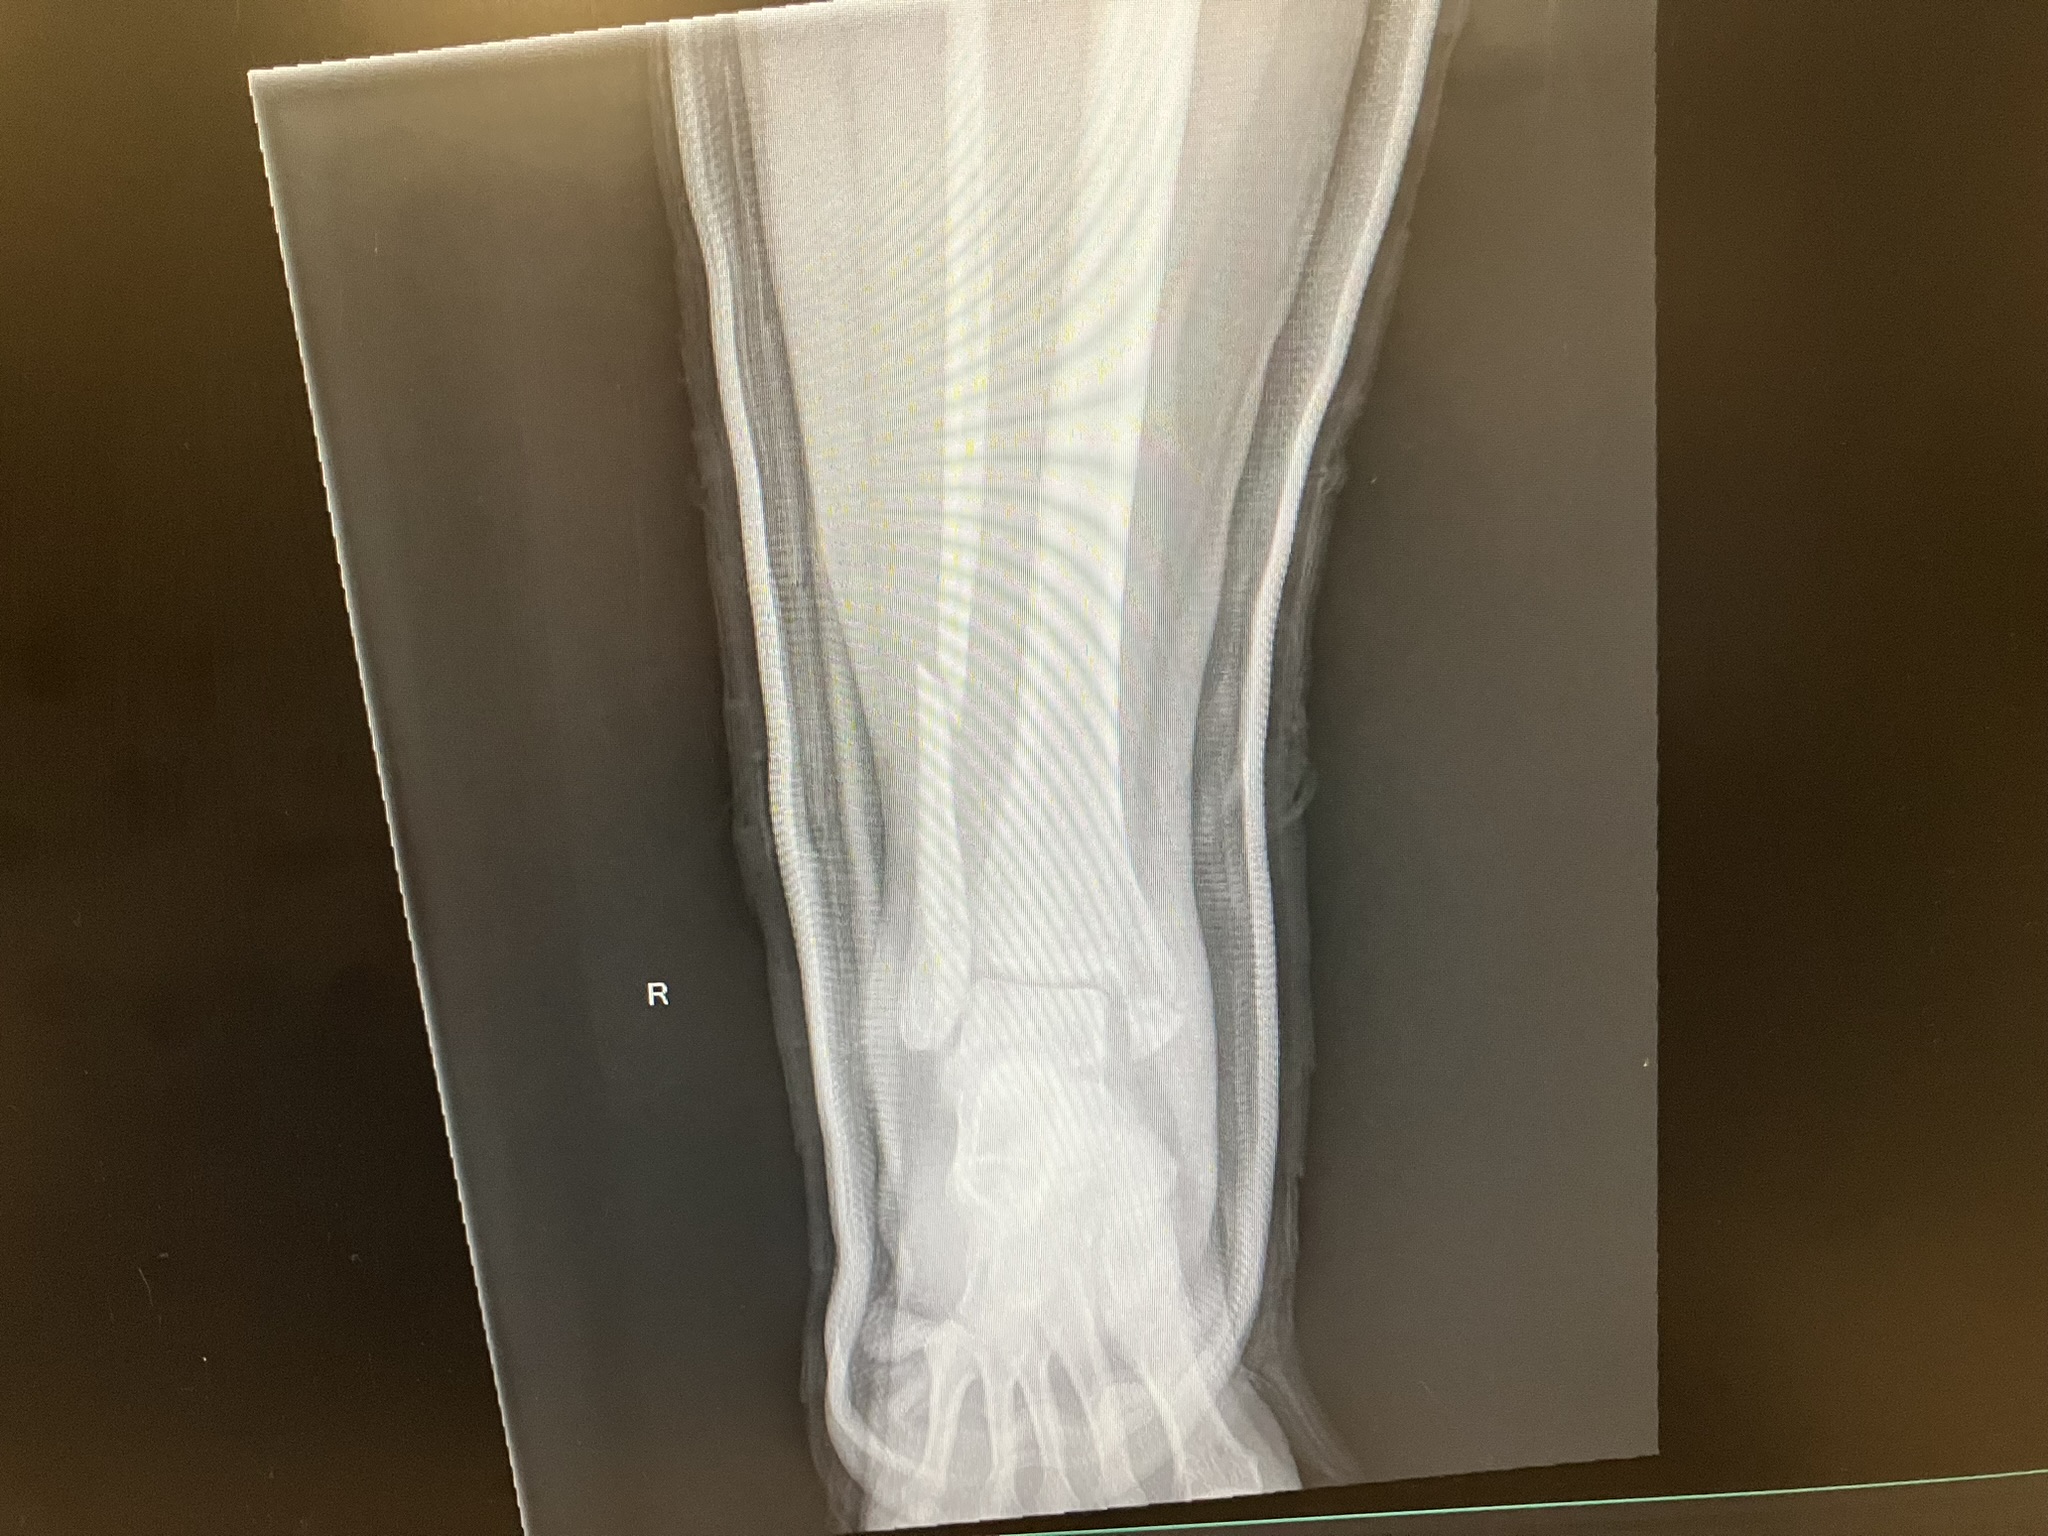 xray of fractured ankle and leg